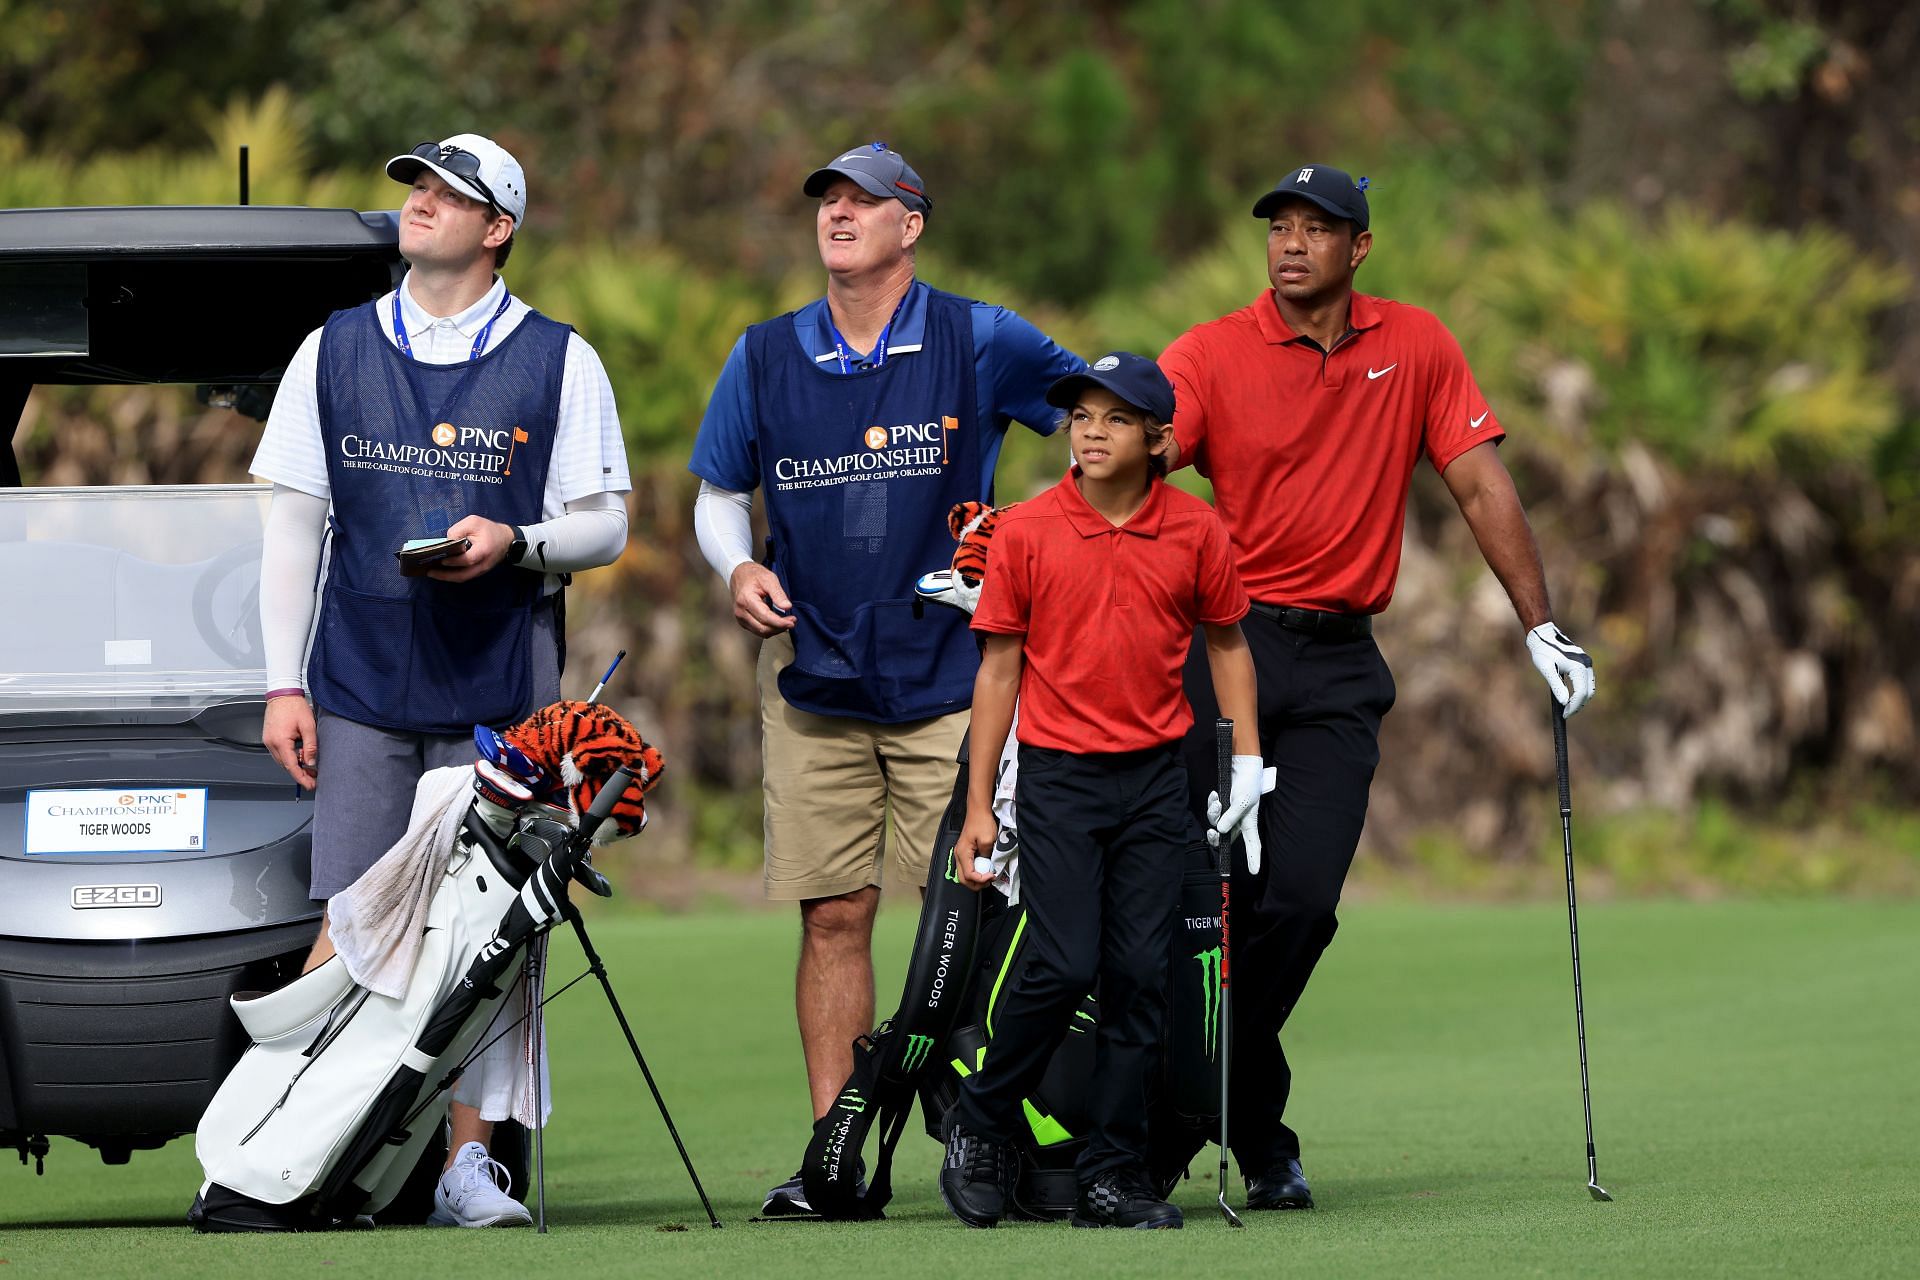 2022 PNC Championship tee times; Team Tiger and Team Thomas to tee off